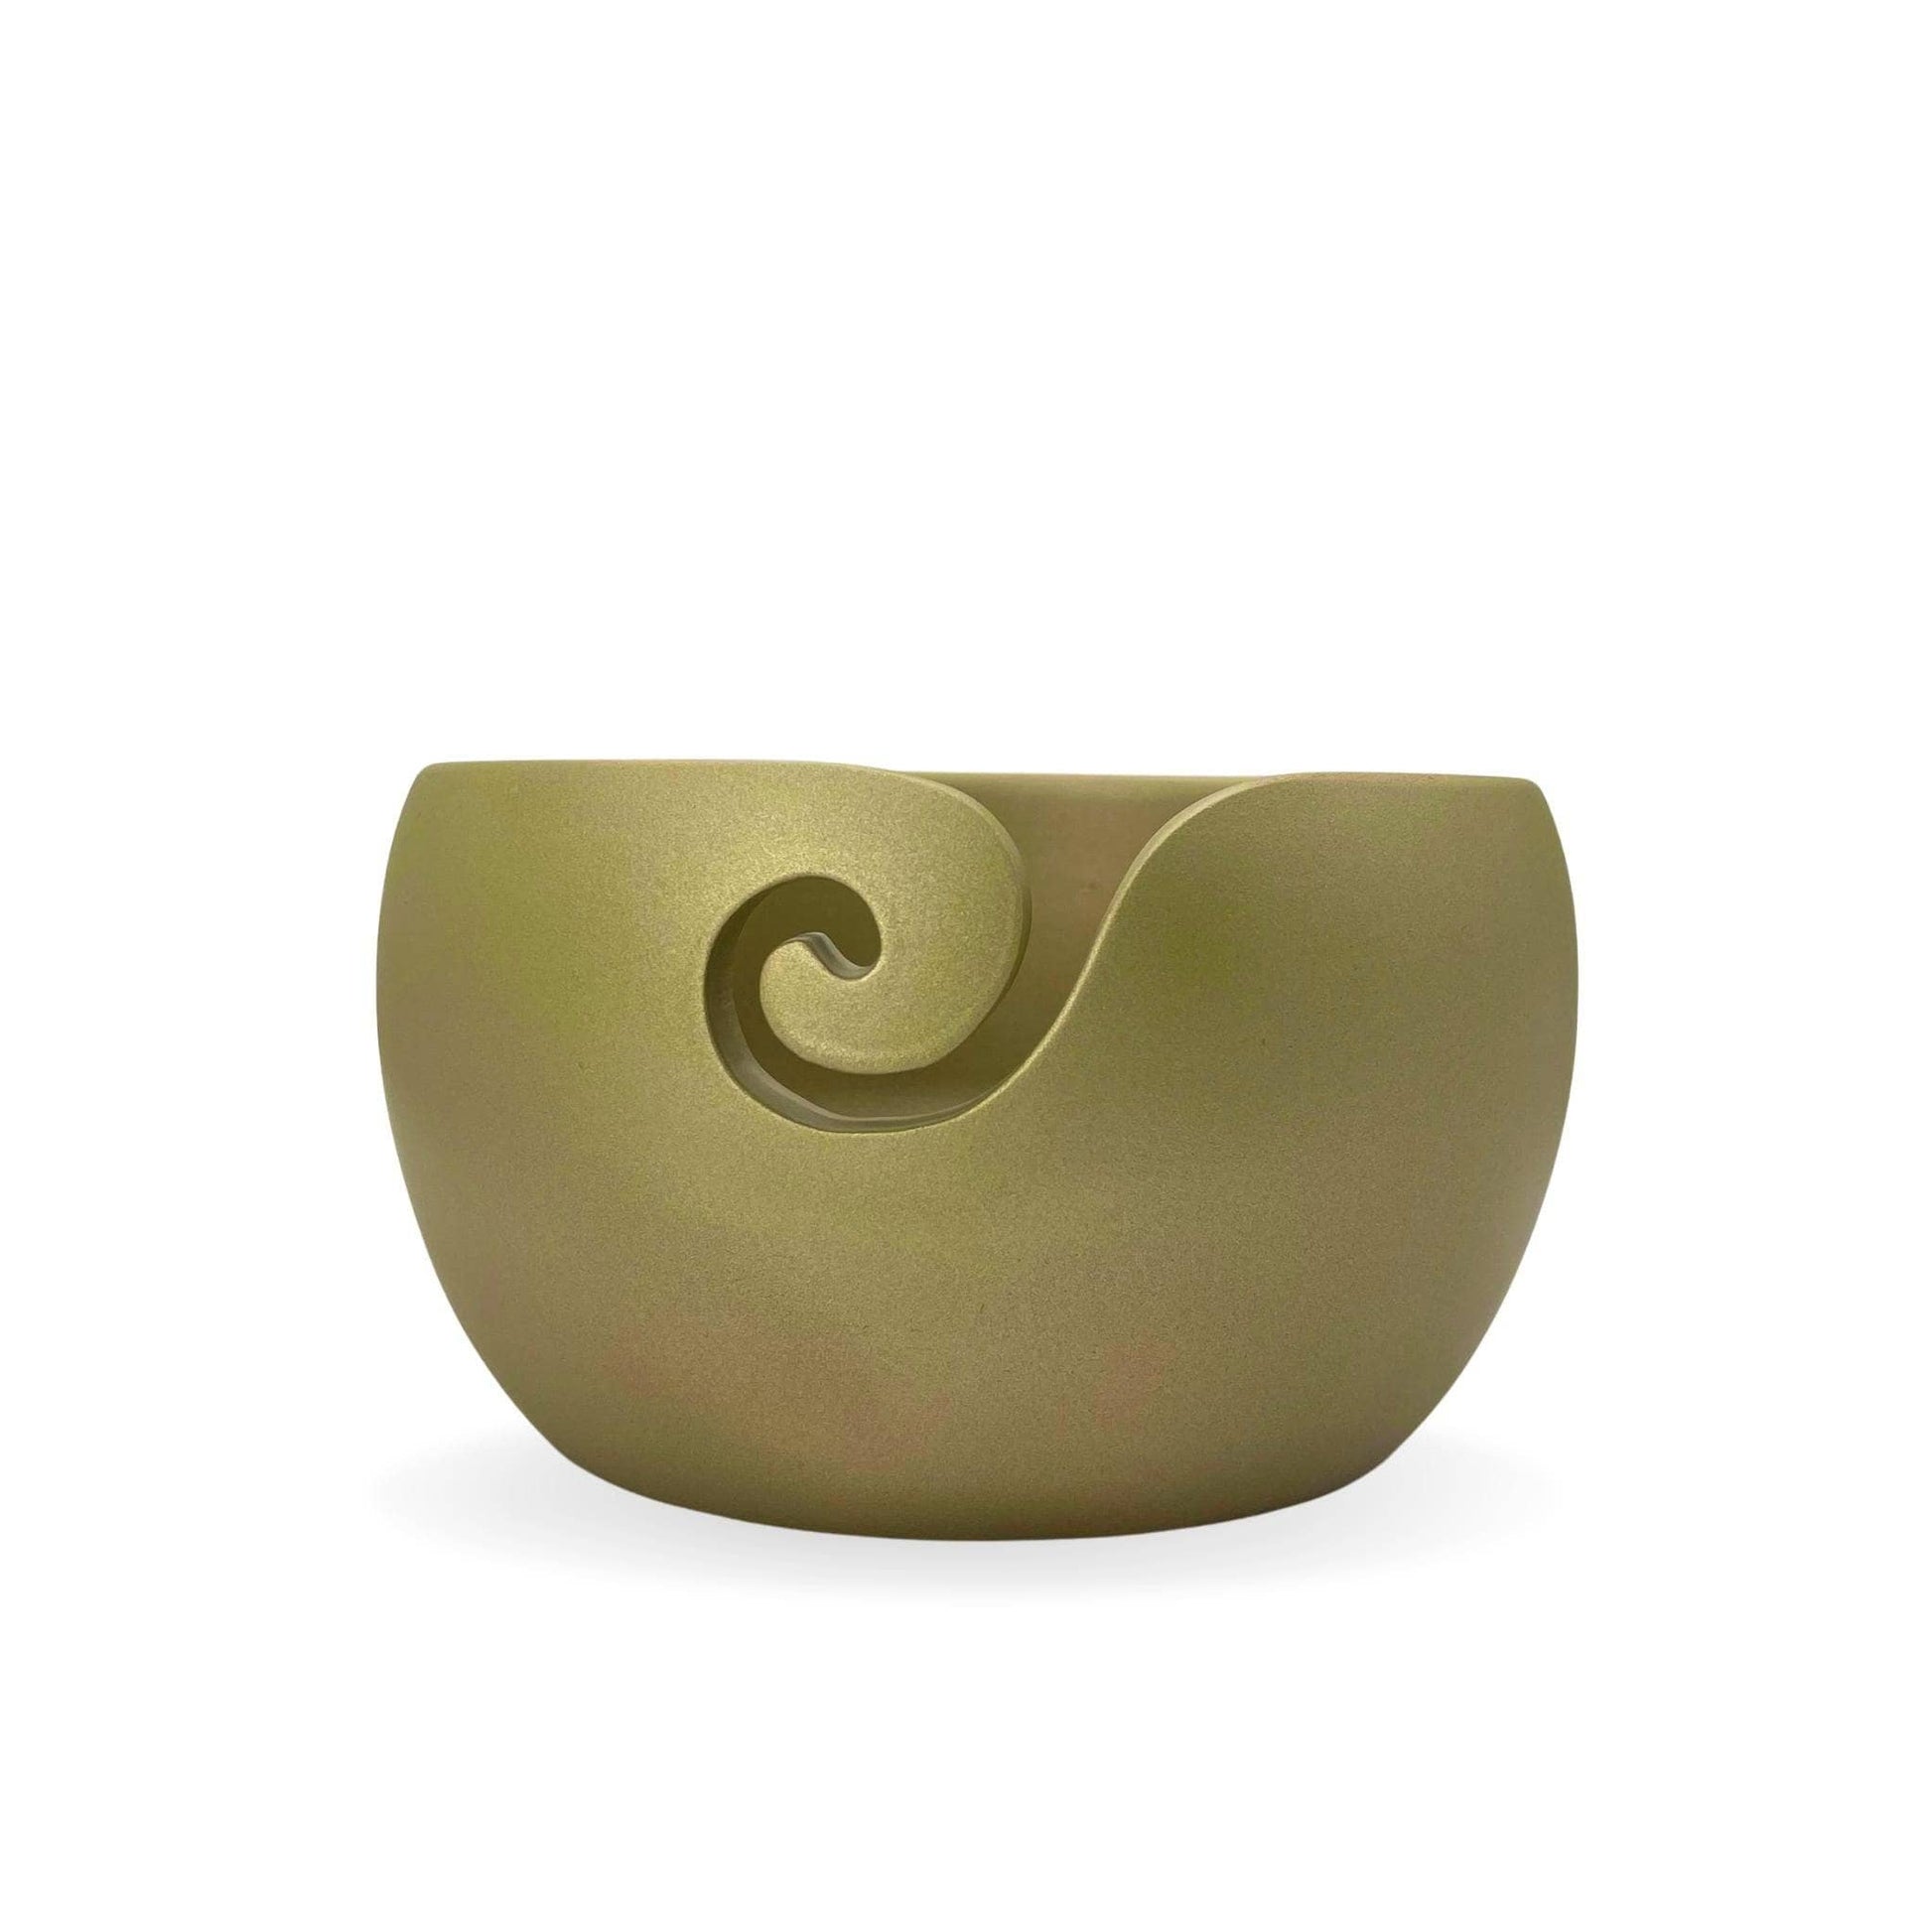 Gold wooden yarn bowl in front of a white background.